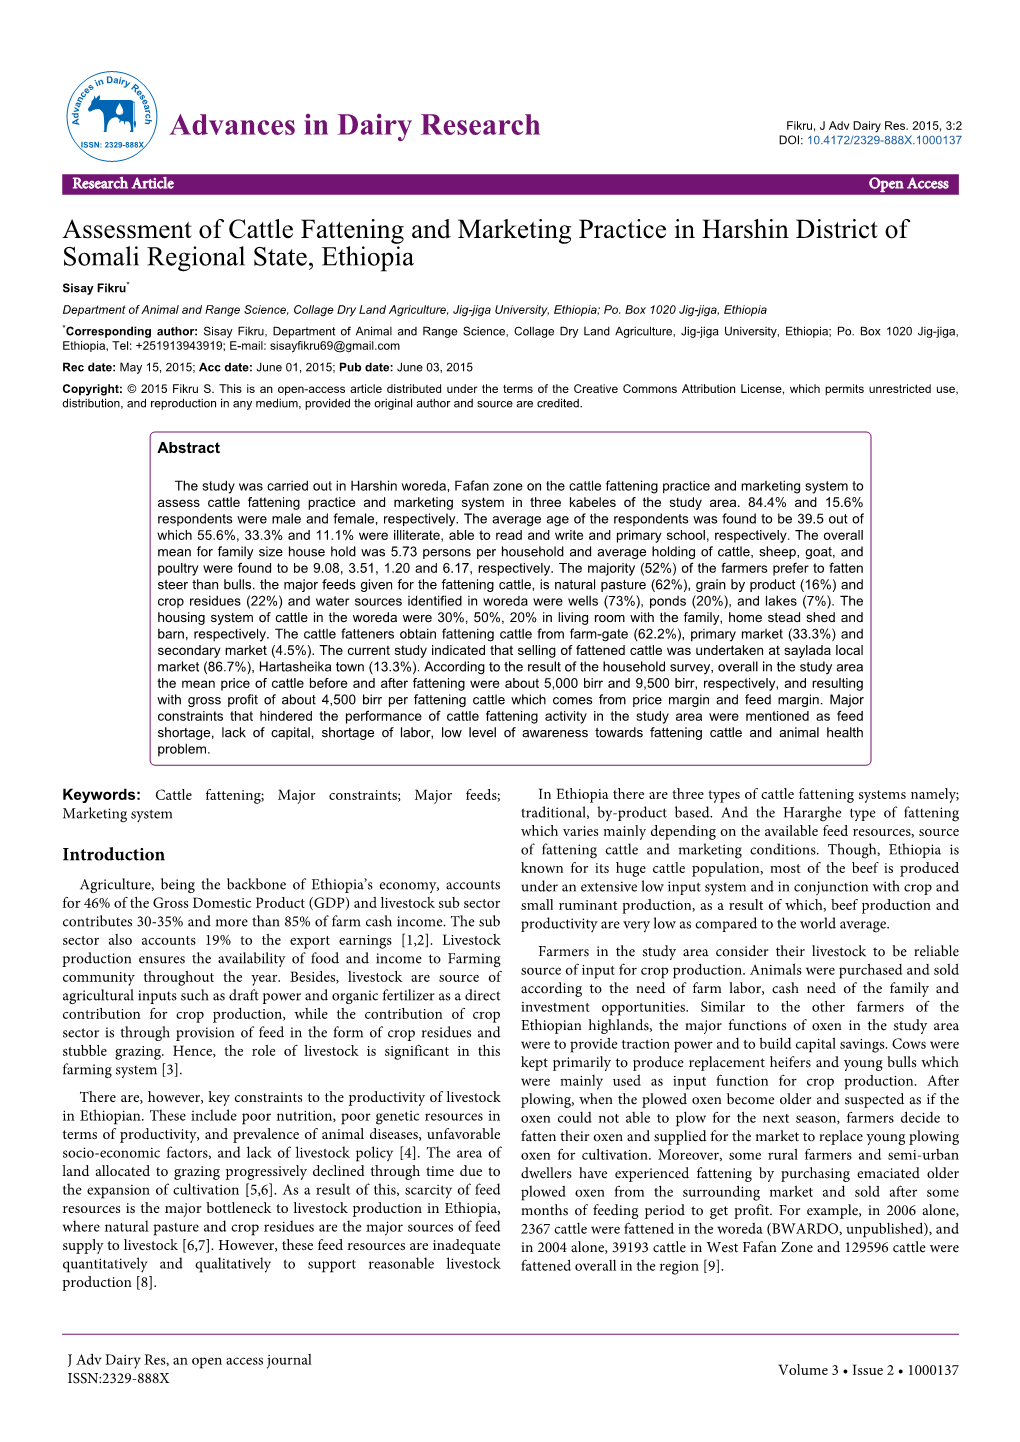 Assessment of Cattle Fattening and Marketing Practice in Harshin